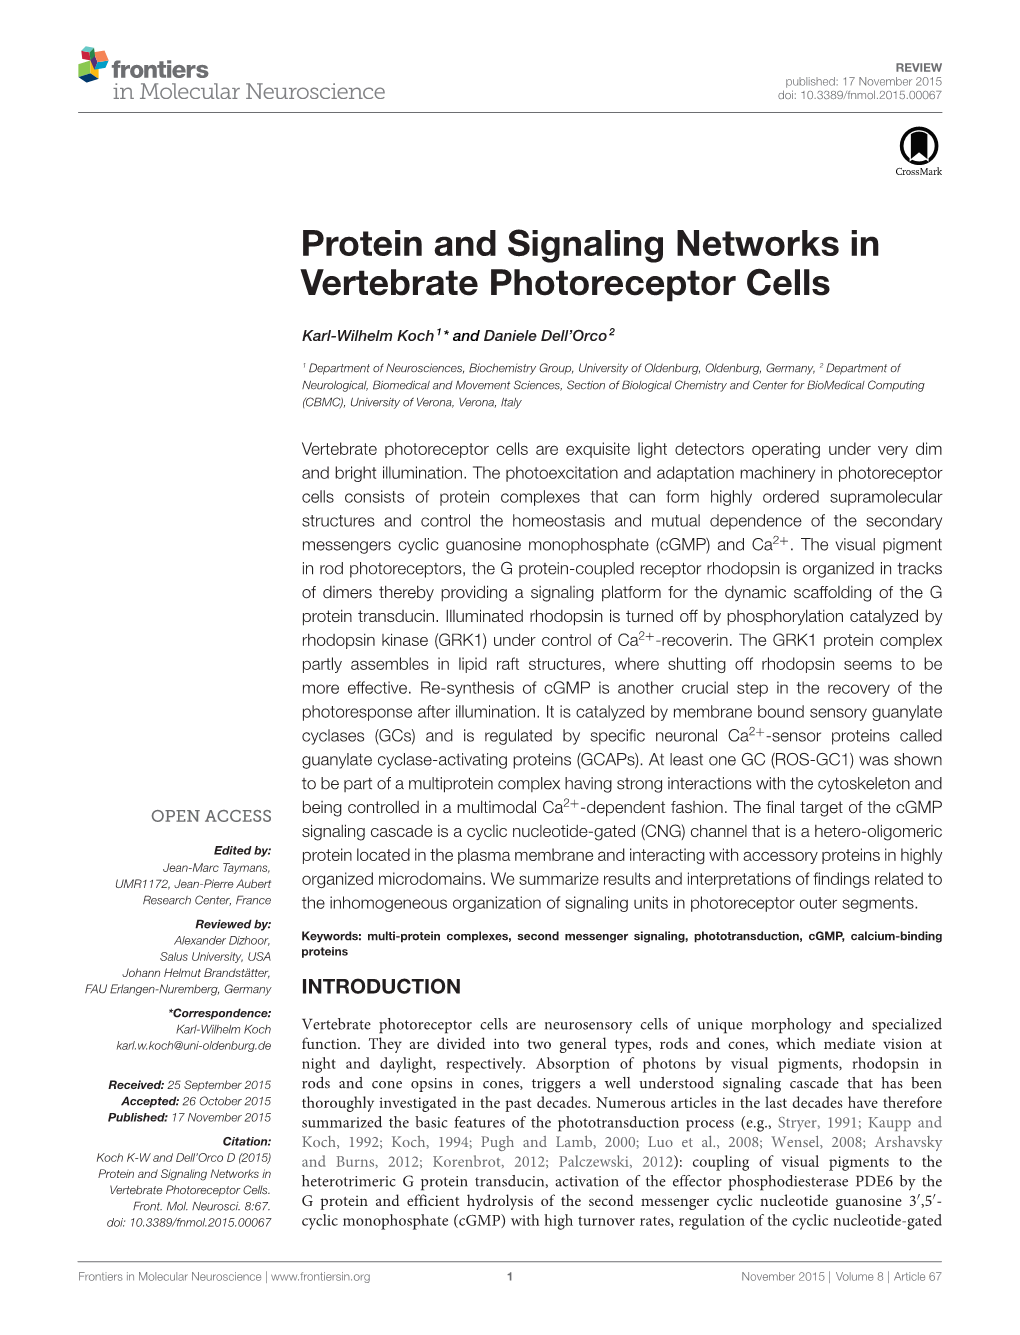 Protein and Signaling Networks in Vertebrate Photoreceptor Cells